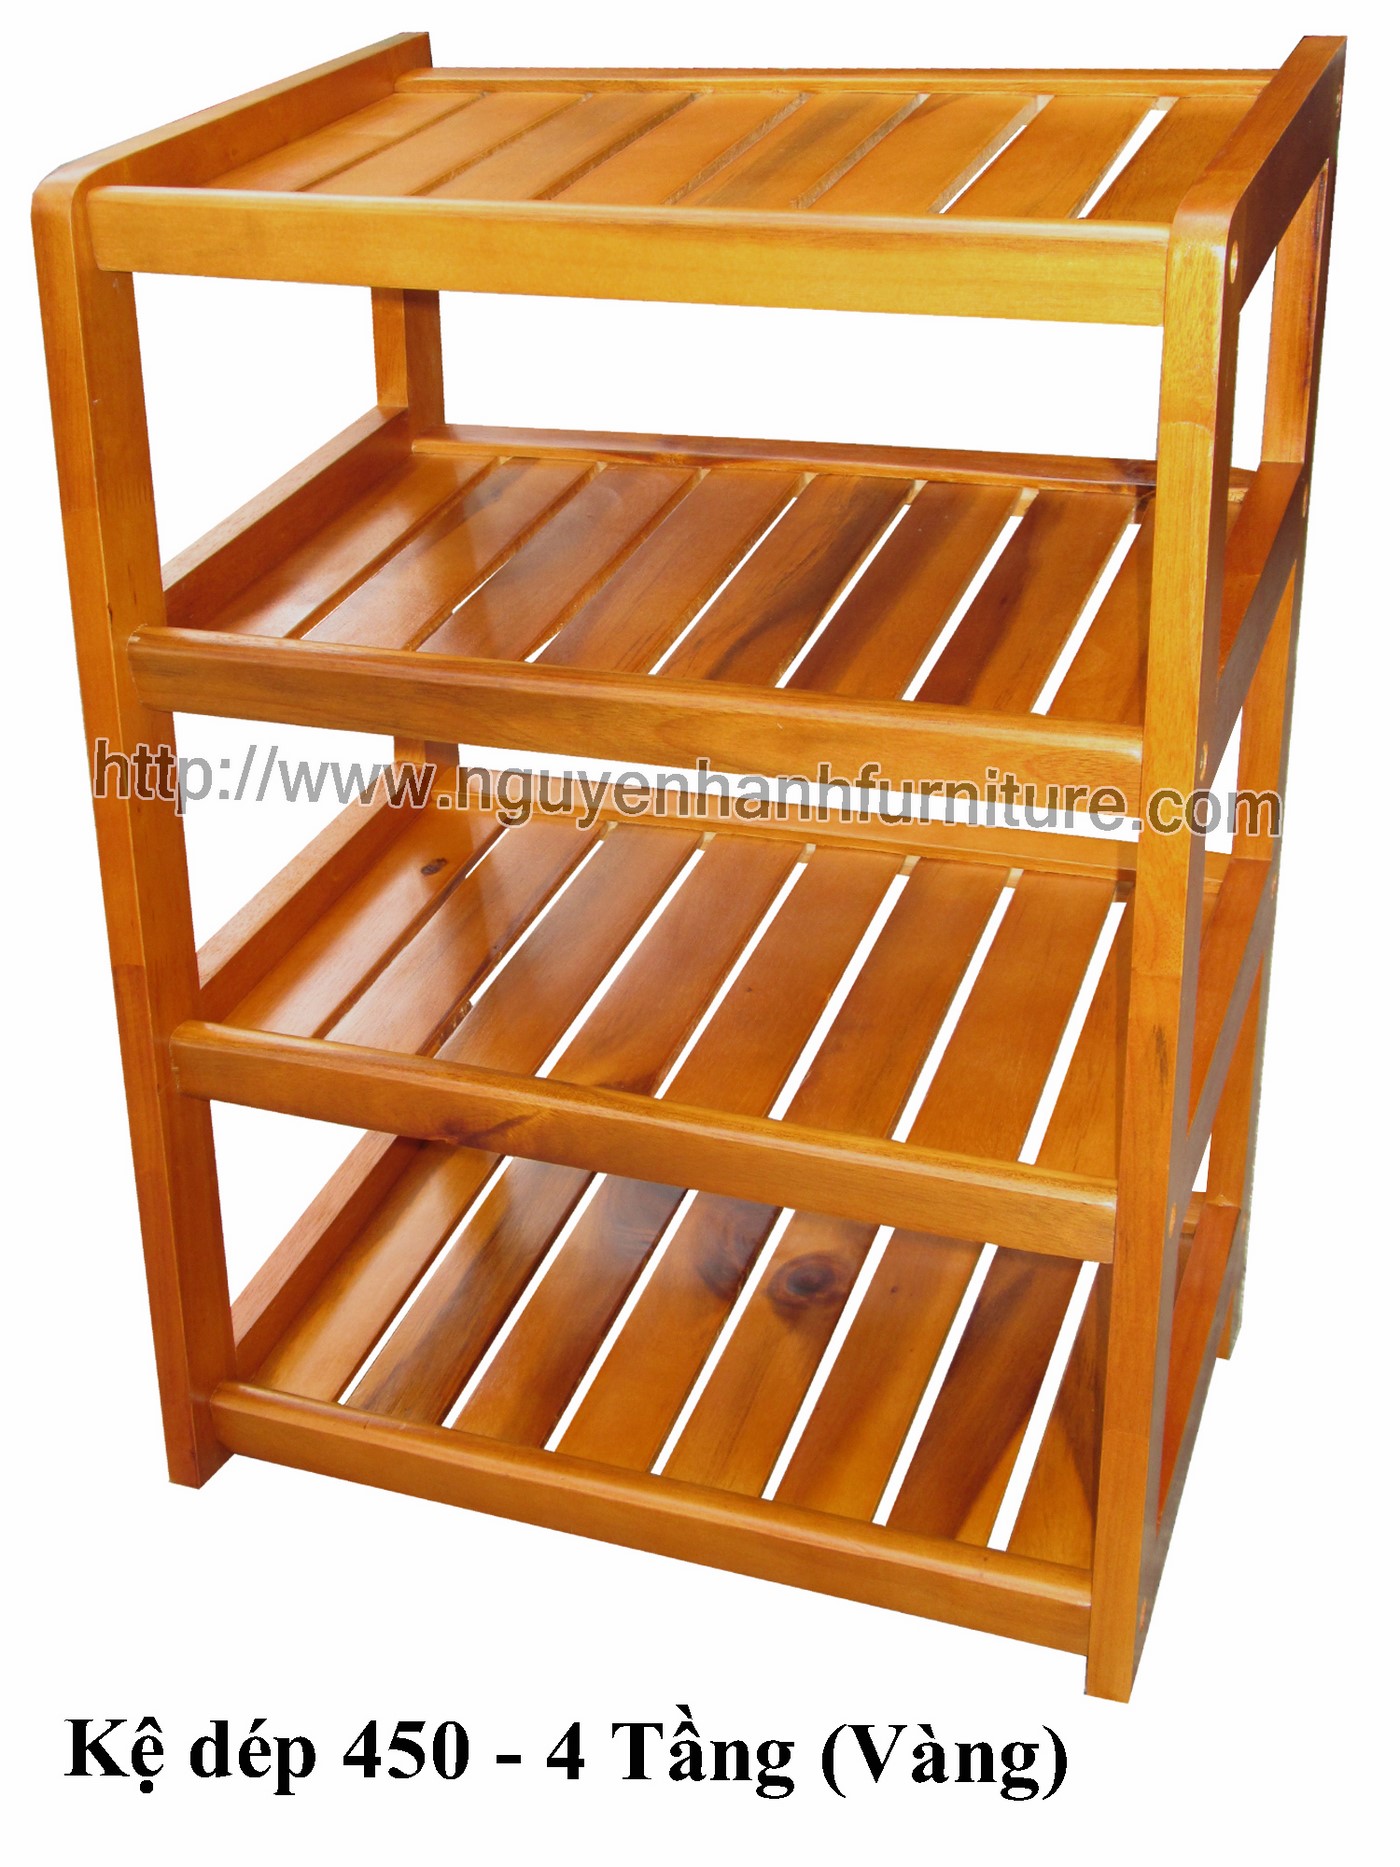 Name product: Shoeshelf 4 Floors 45 with sparse blades (Yellow) - Dimensions: 45 x 30 x 62 (H) - Description: Wood natural rubber